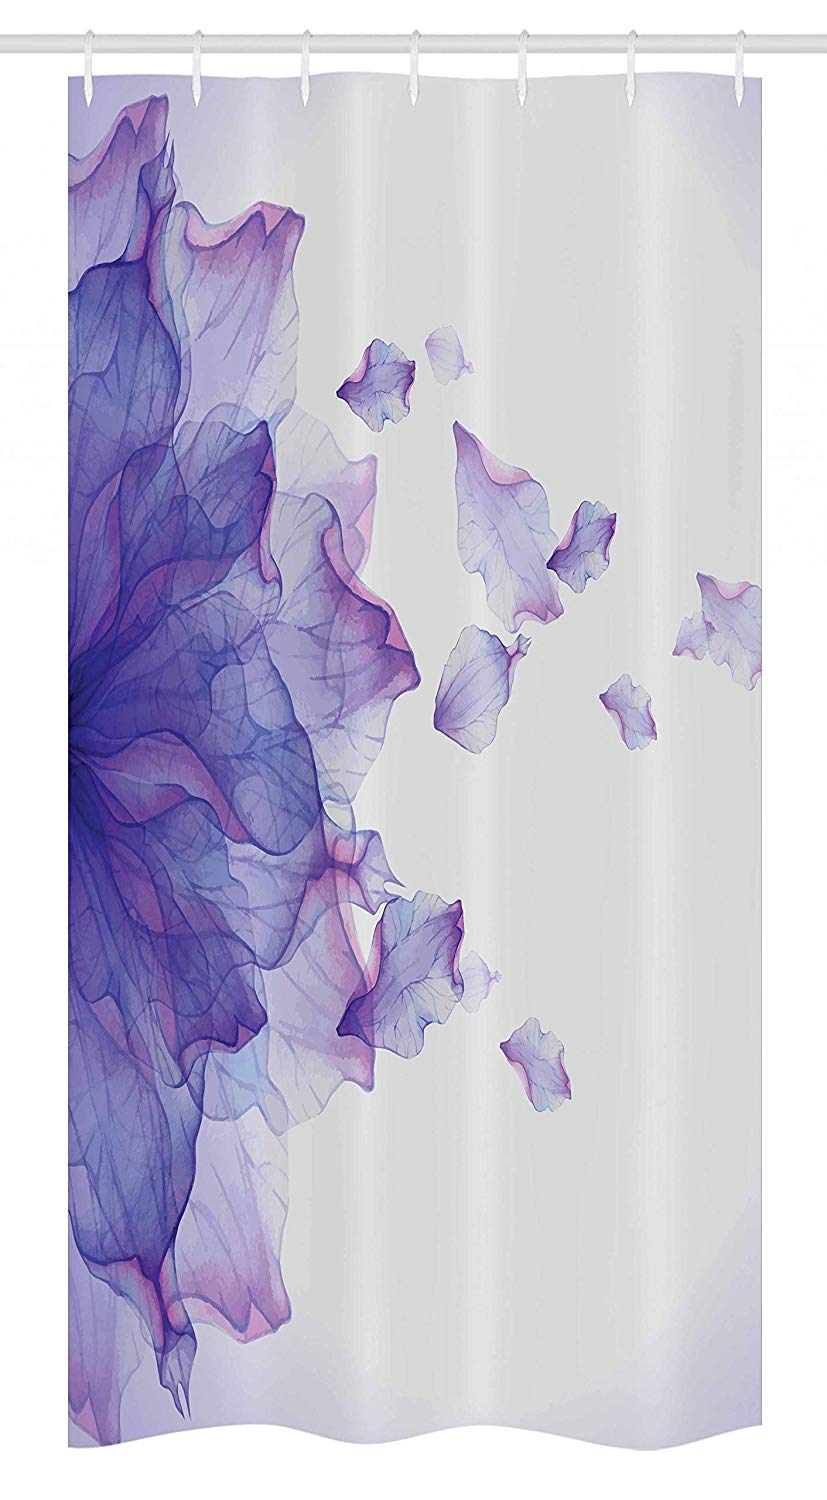 Ambesonne Flower Stall Shower Curtain, Abstract Themed Modern Futuristic Image with Water Like Colored Artwork Print, Fabric Bathroom Decor Set with Hooks, 36